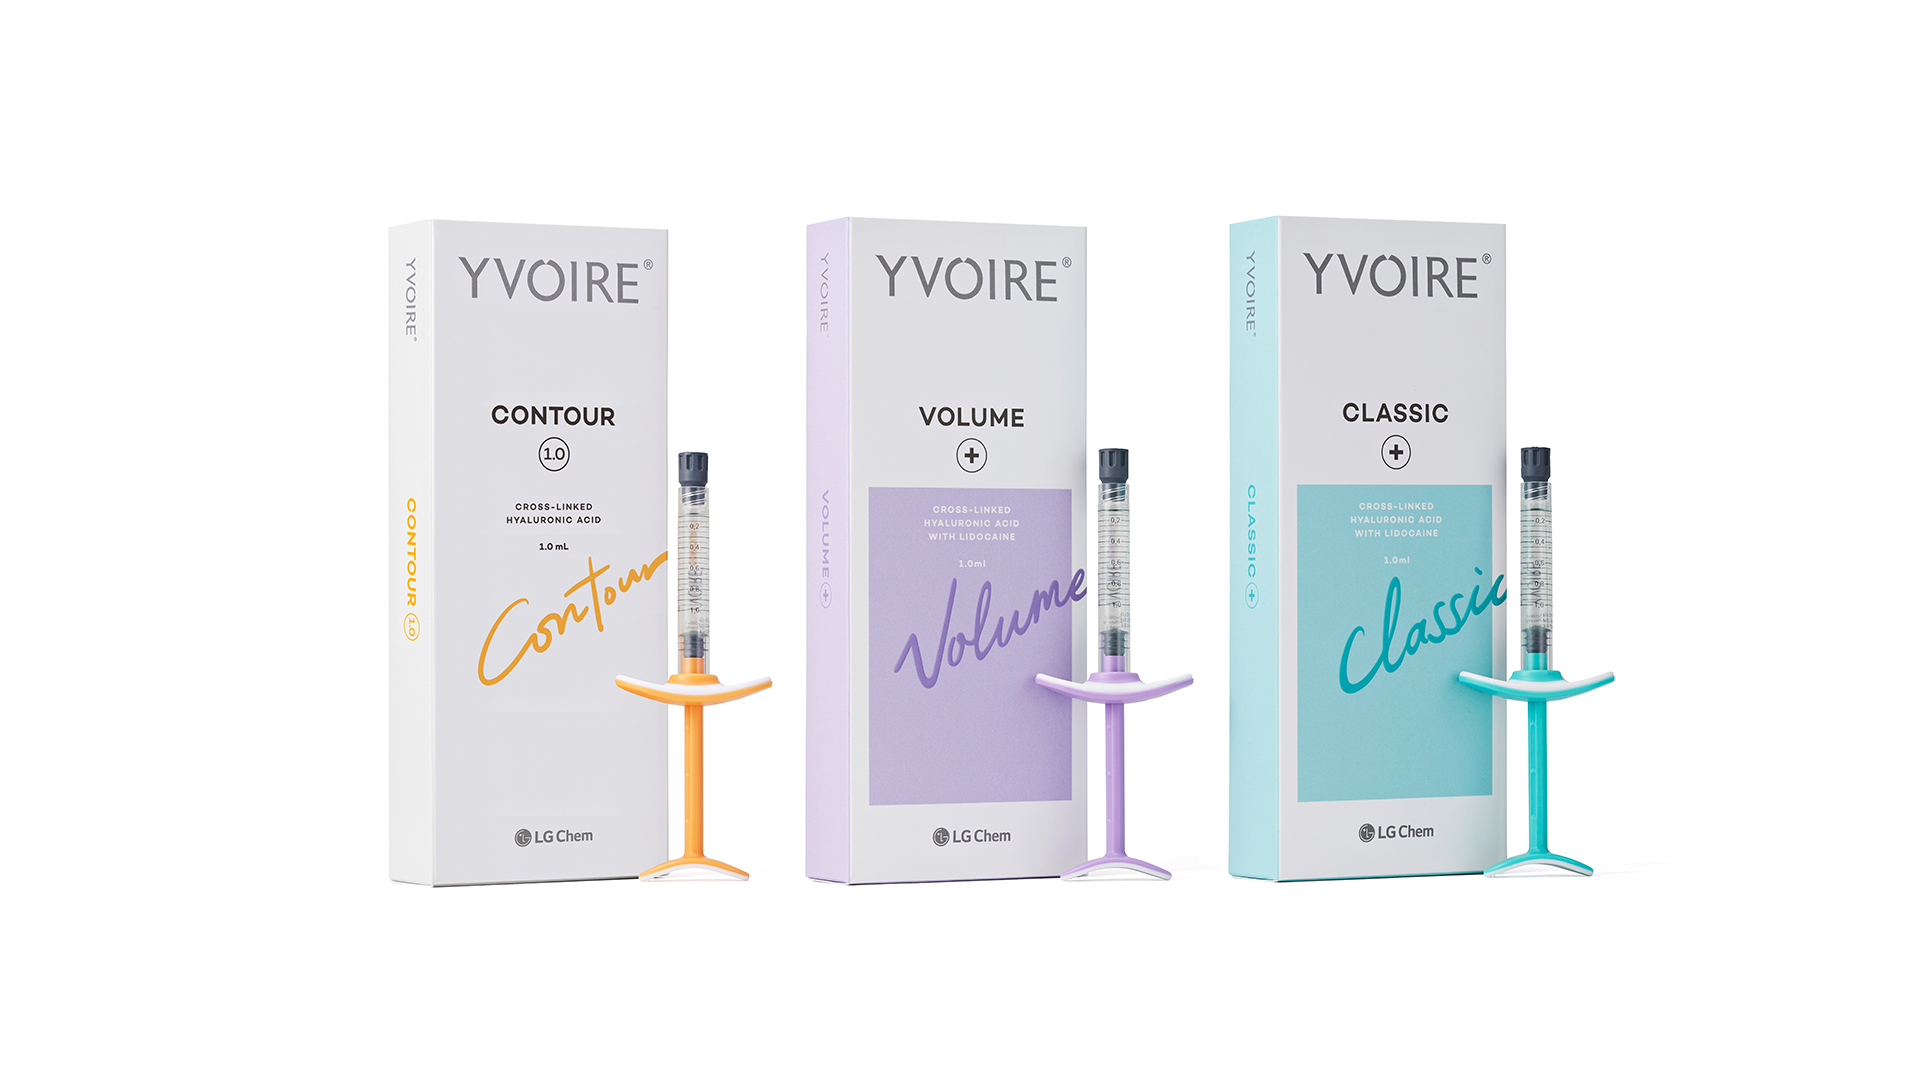 Yvoire new packaging